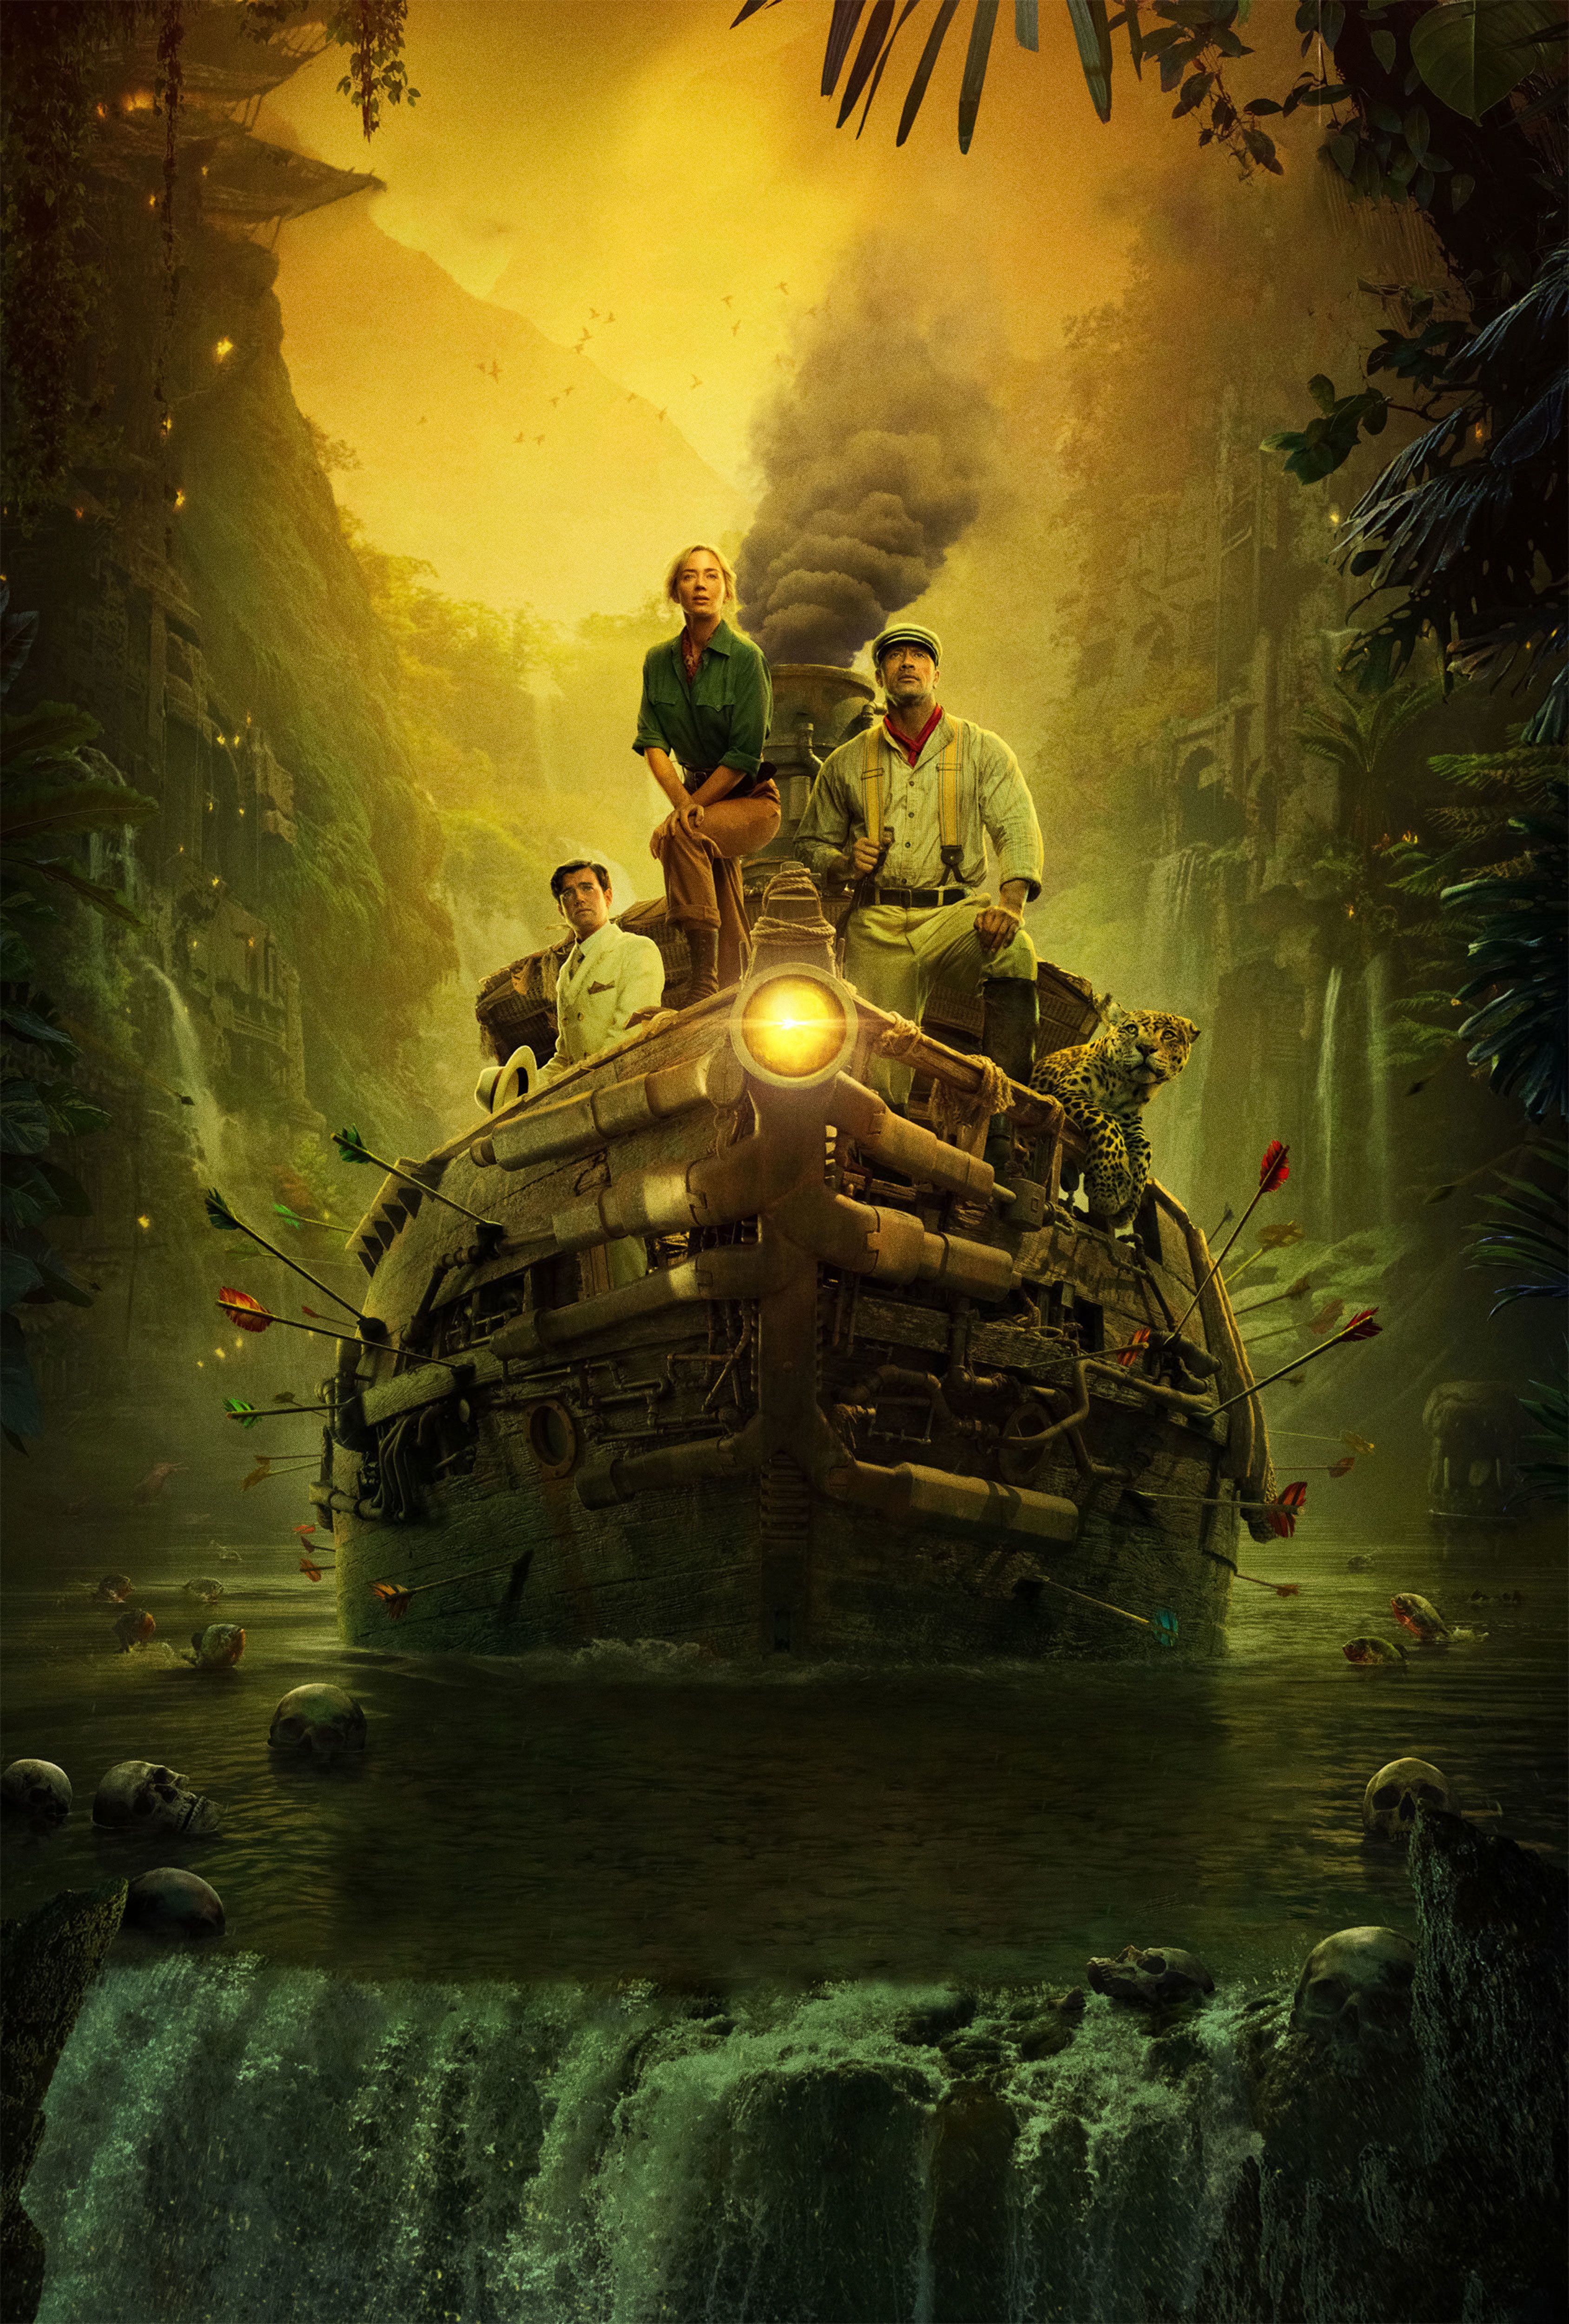 Free download Jungle Cruise 2020 Movie Wallpaper HD Movies 4K Wallpaper [3376x5000] for your Desktop, Mobile & Tablet. Explore 2020 iPhone Wallpaper iPhone Wallpaper, iPhone Player 2020 Wallpaper, iPhone 4k 2020 Wallpaper